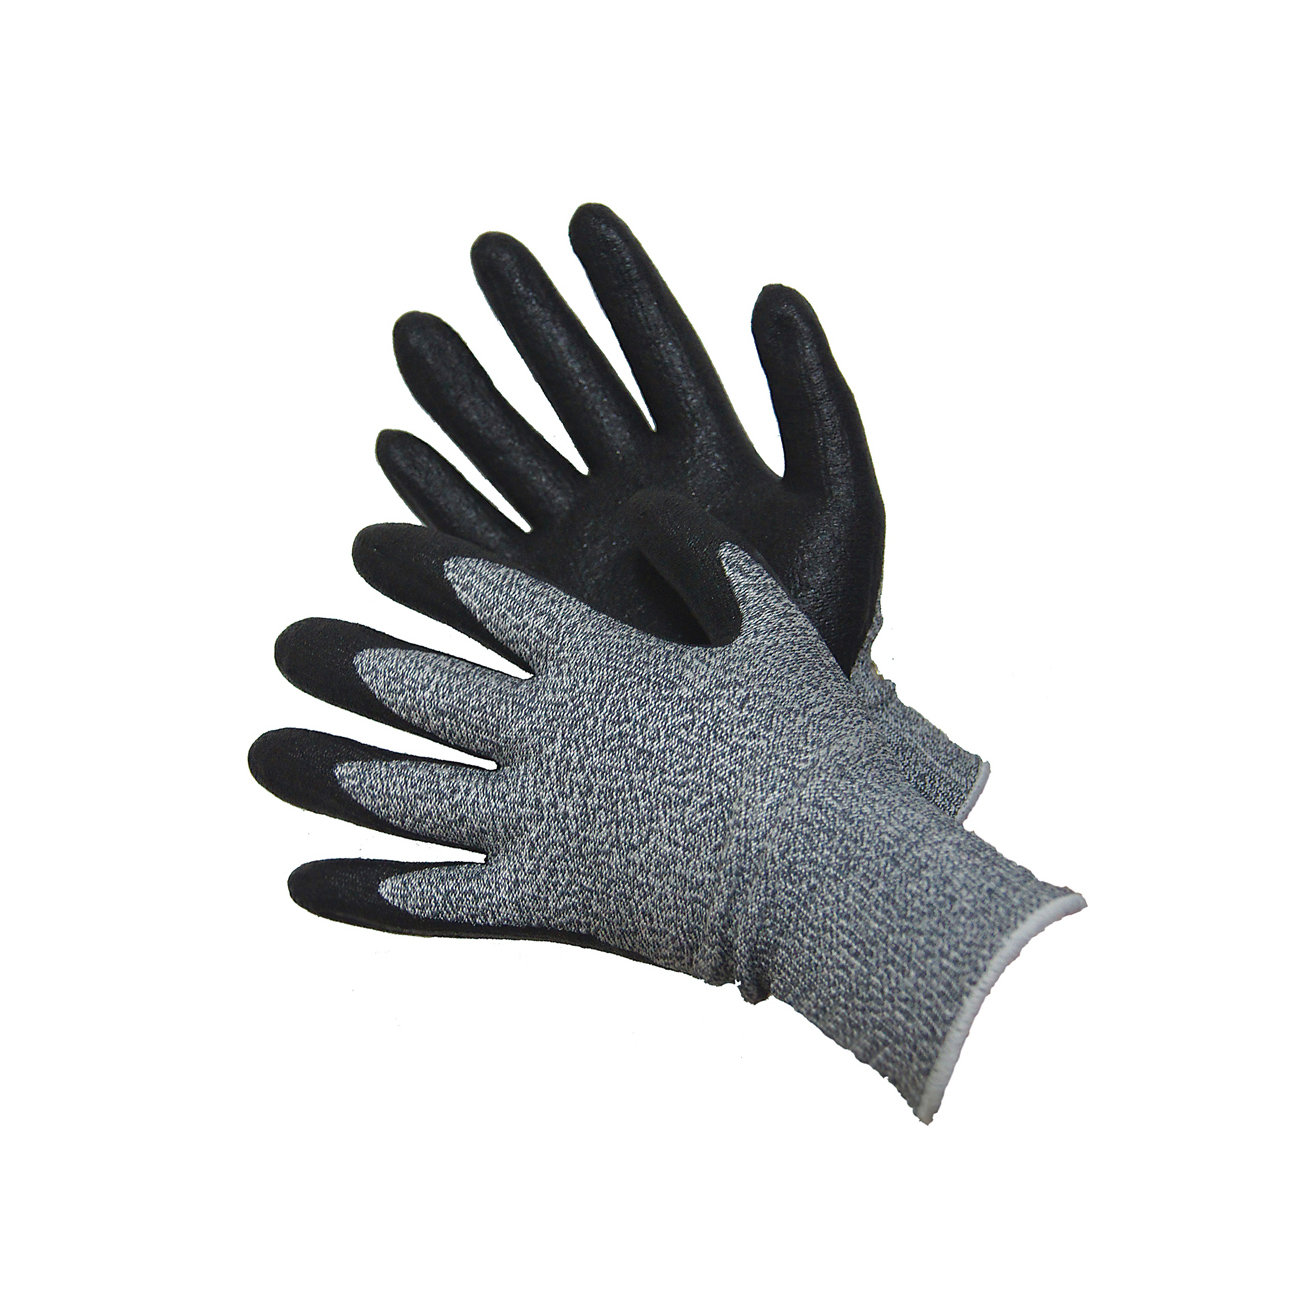 Cut Resistant Glove with Foam NBR Palm Coated